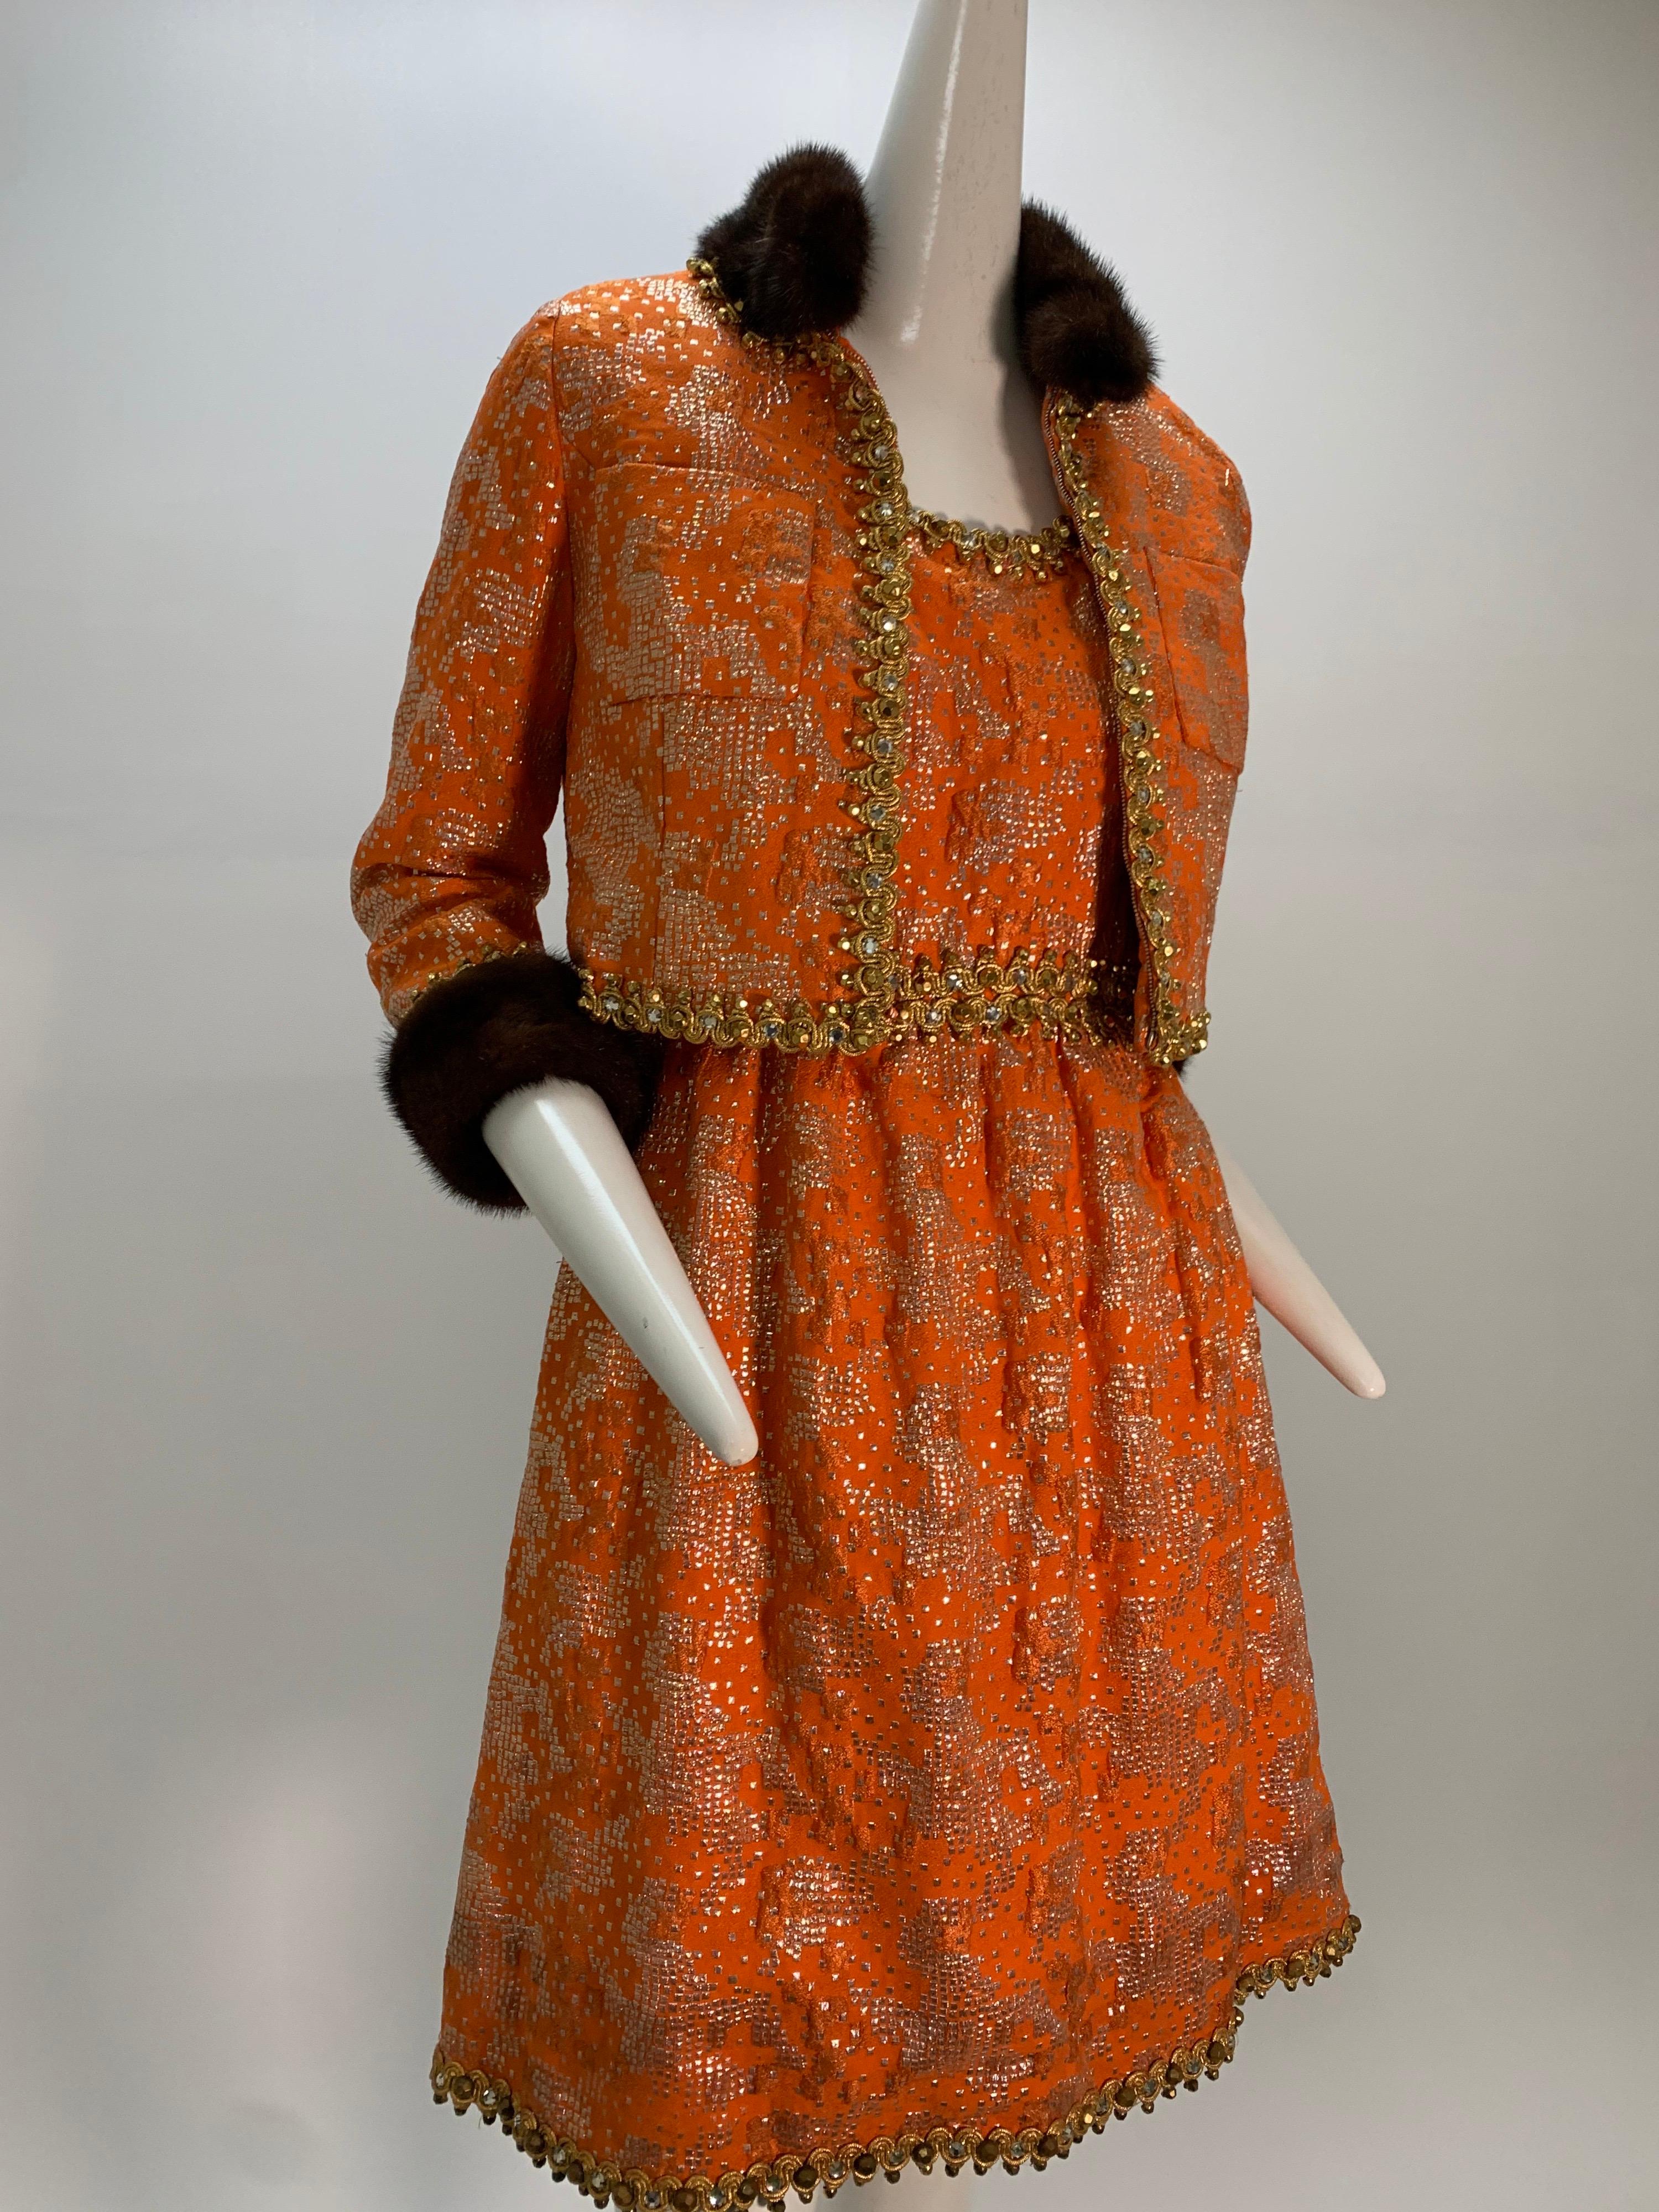 1960s Oscar De La Renta tangerine silk lame brocade cocktail dress and jacket ensemble: orange silk with silver lame square patterns scattered throughout a tank-style dress trimmed with gold braidwork at waist, and neckline and hem. The waist length